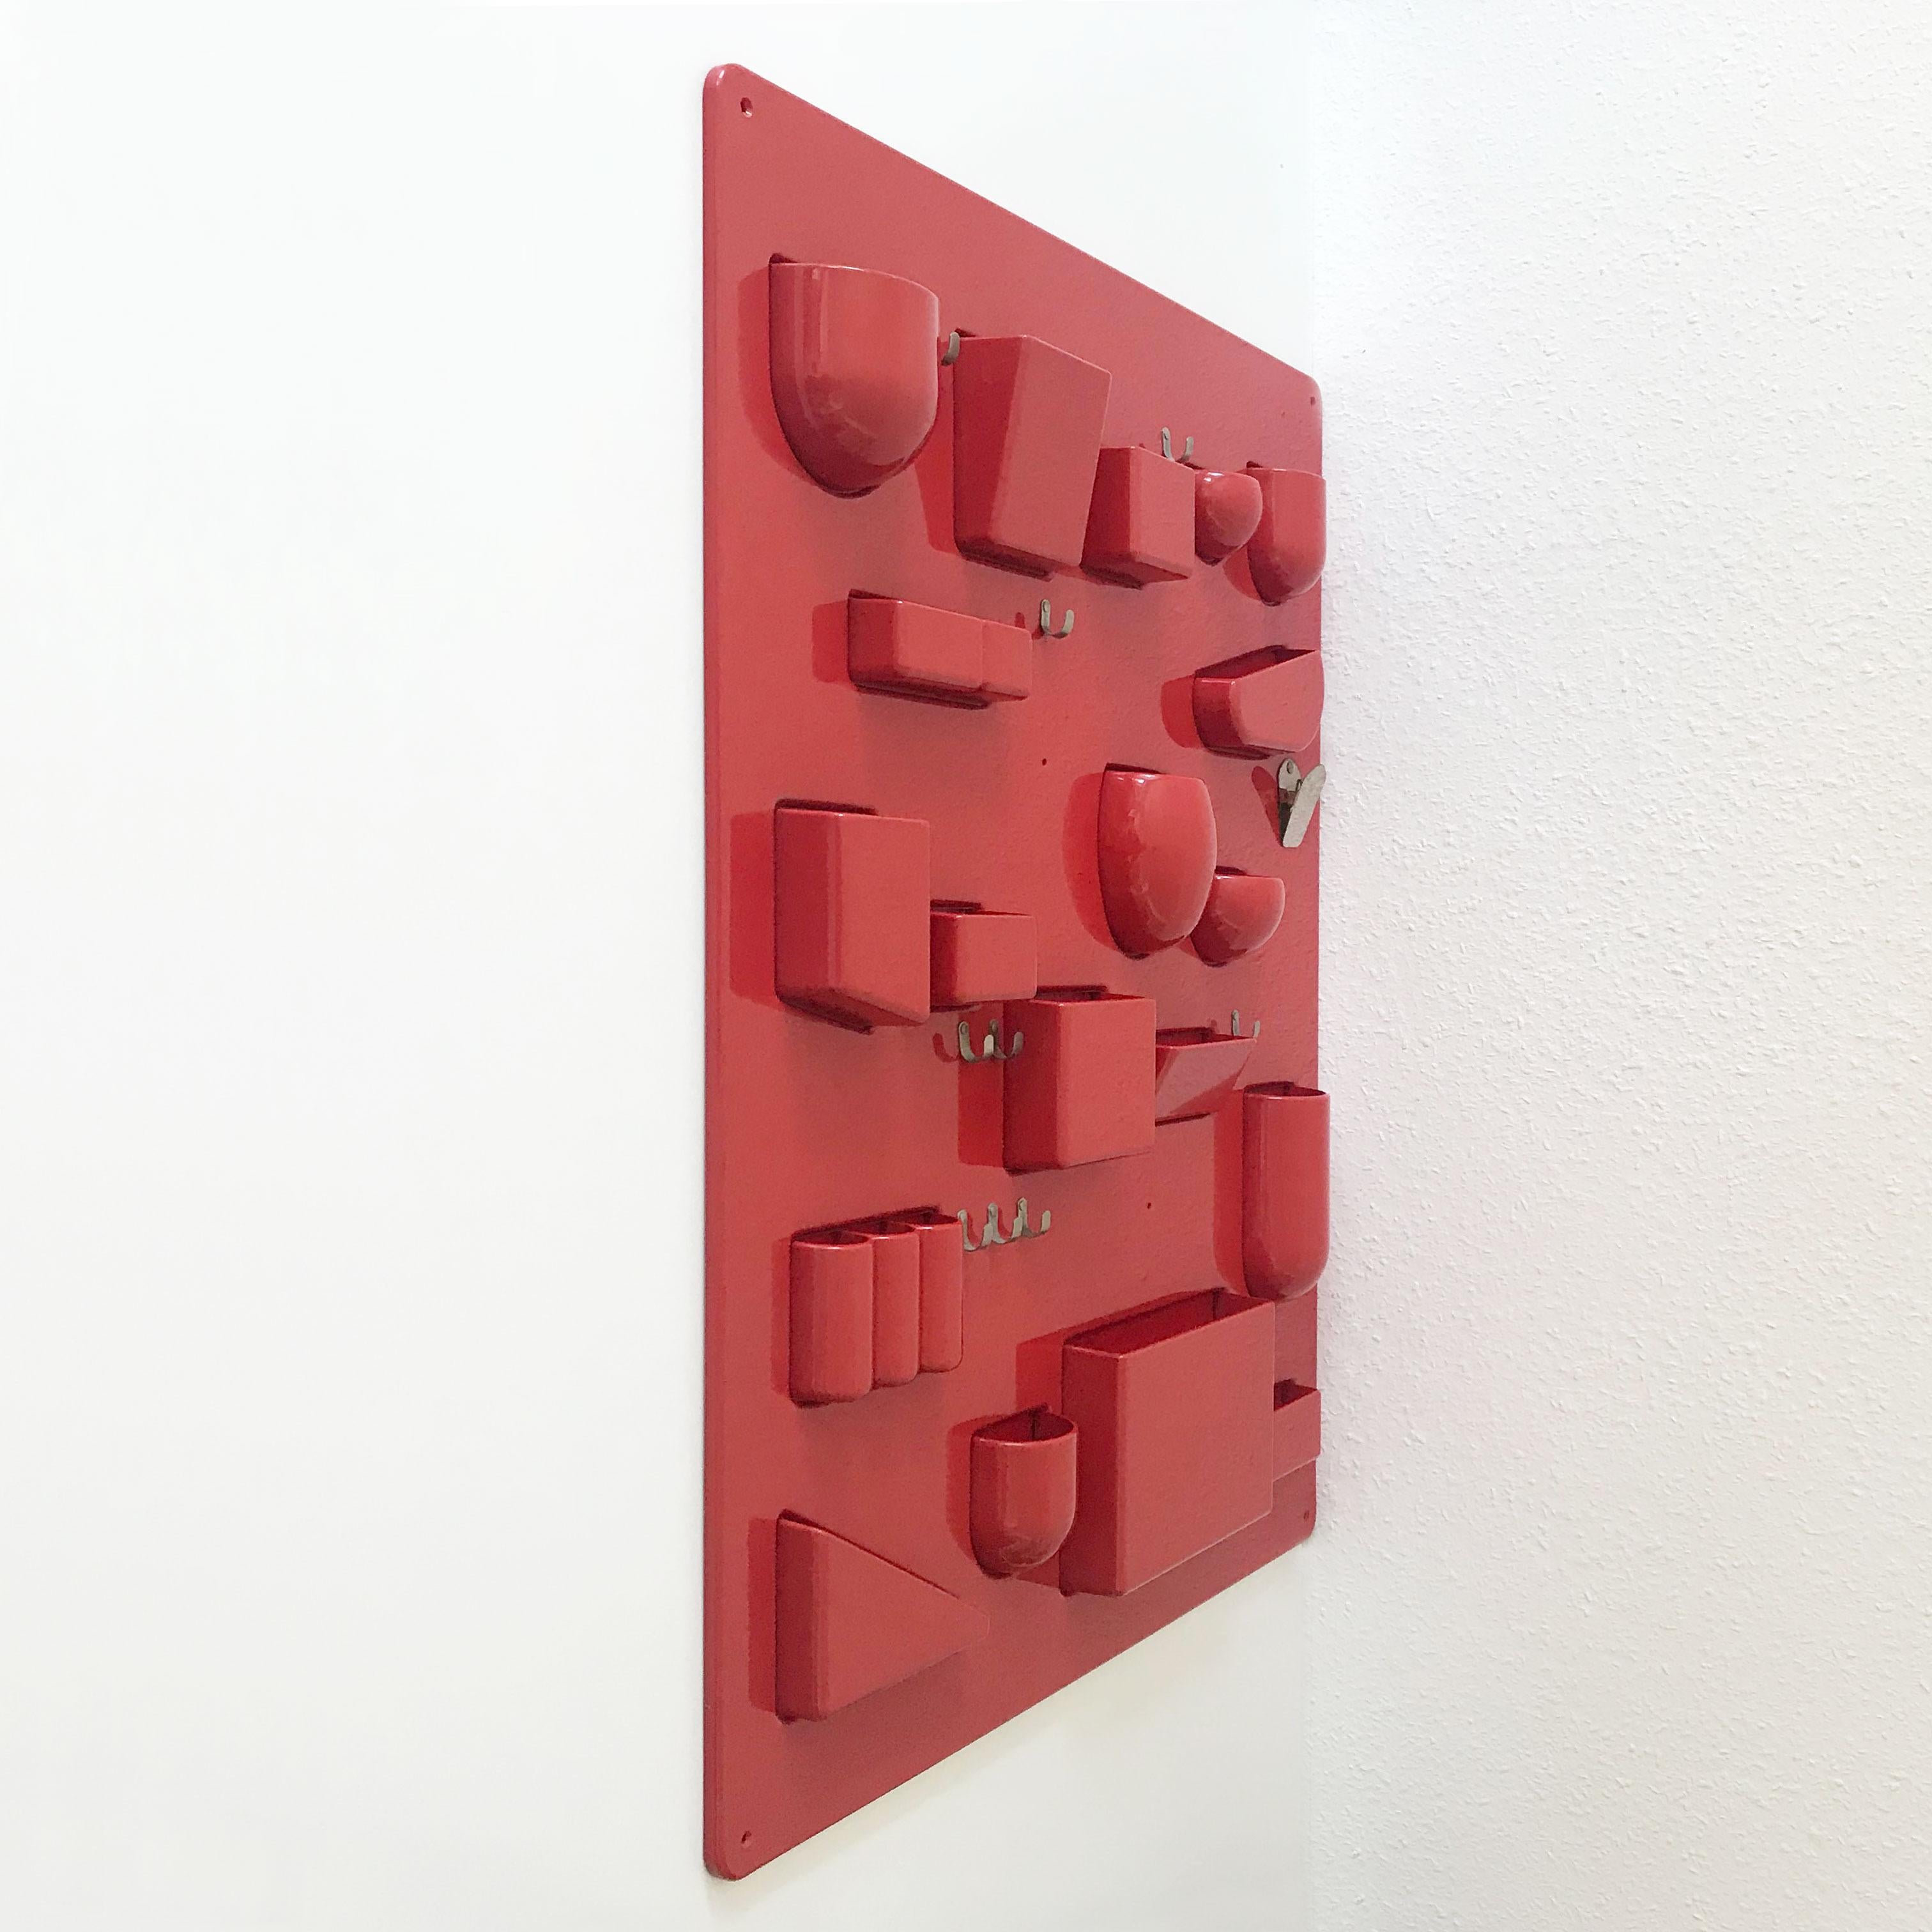 Exceptional Mid-Century Modern wall organizer Uten.Silo I, designed by Dorothee Becker in 1969. Manufactured in 1970s by Design M, Ingo Maurer, Munich, Germany.
This is the large version.

The Uten.Silo I is executed in tomato red ABS plastic and